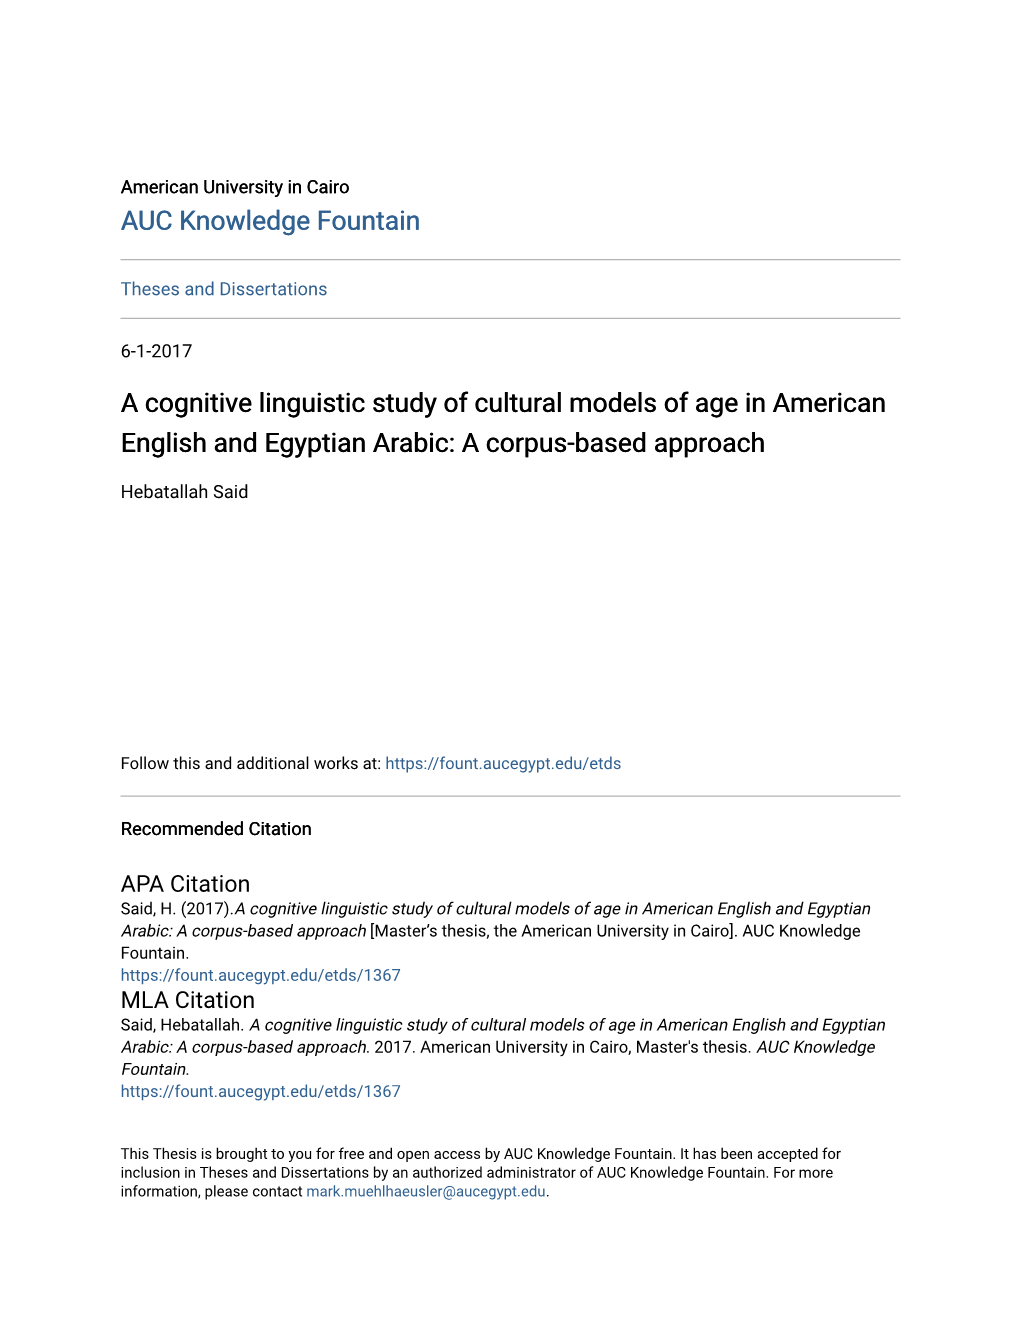 A Cognitive Linguistic Study of Cultural Models of Age in American English and Egyptian Arabic: a Corpus-Based Approach